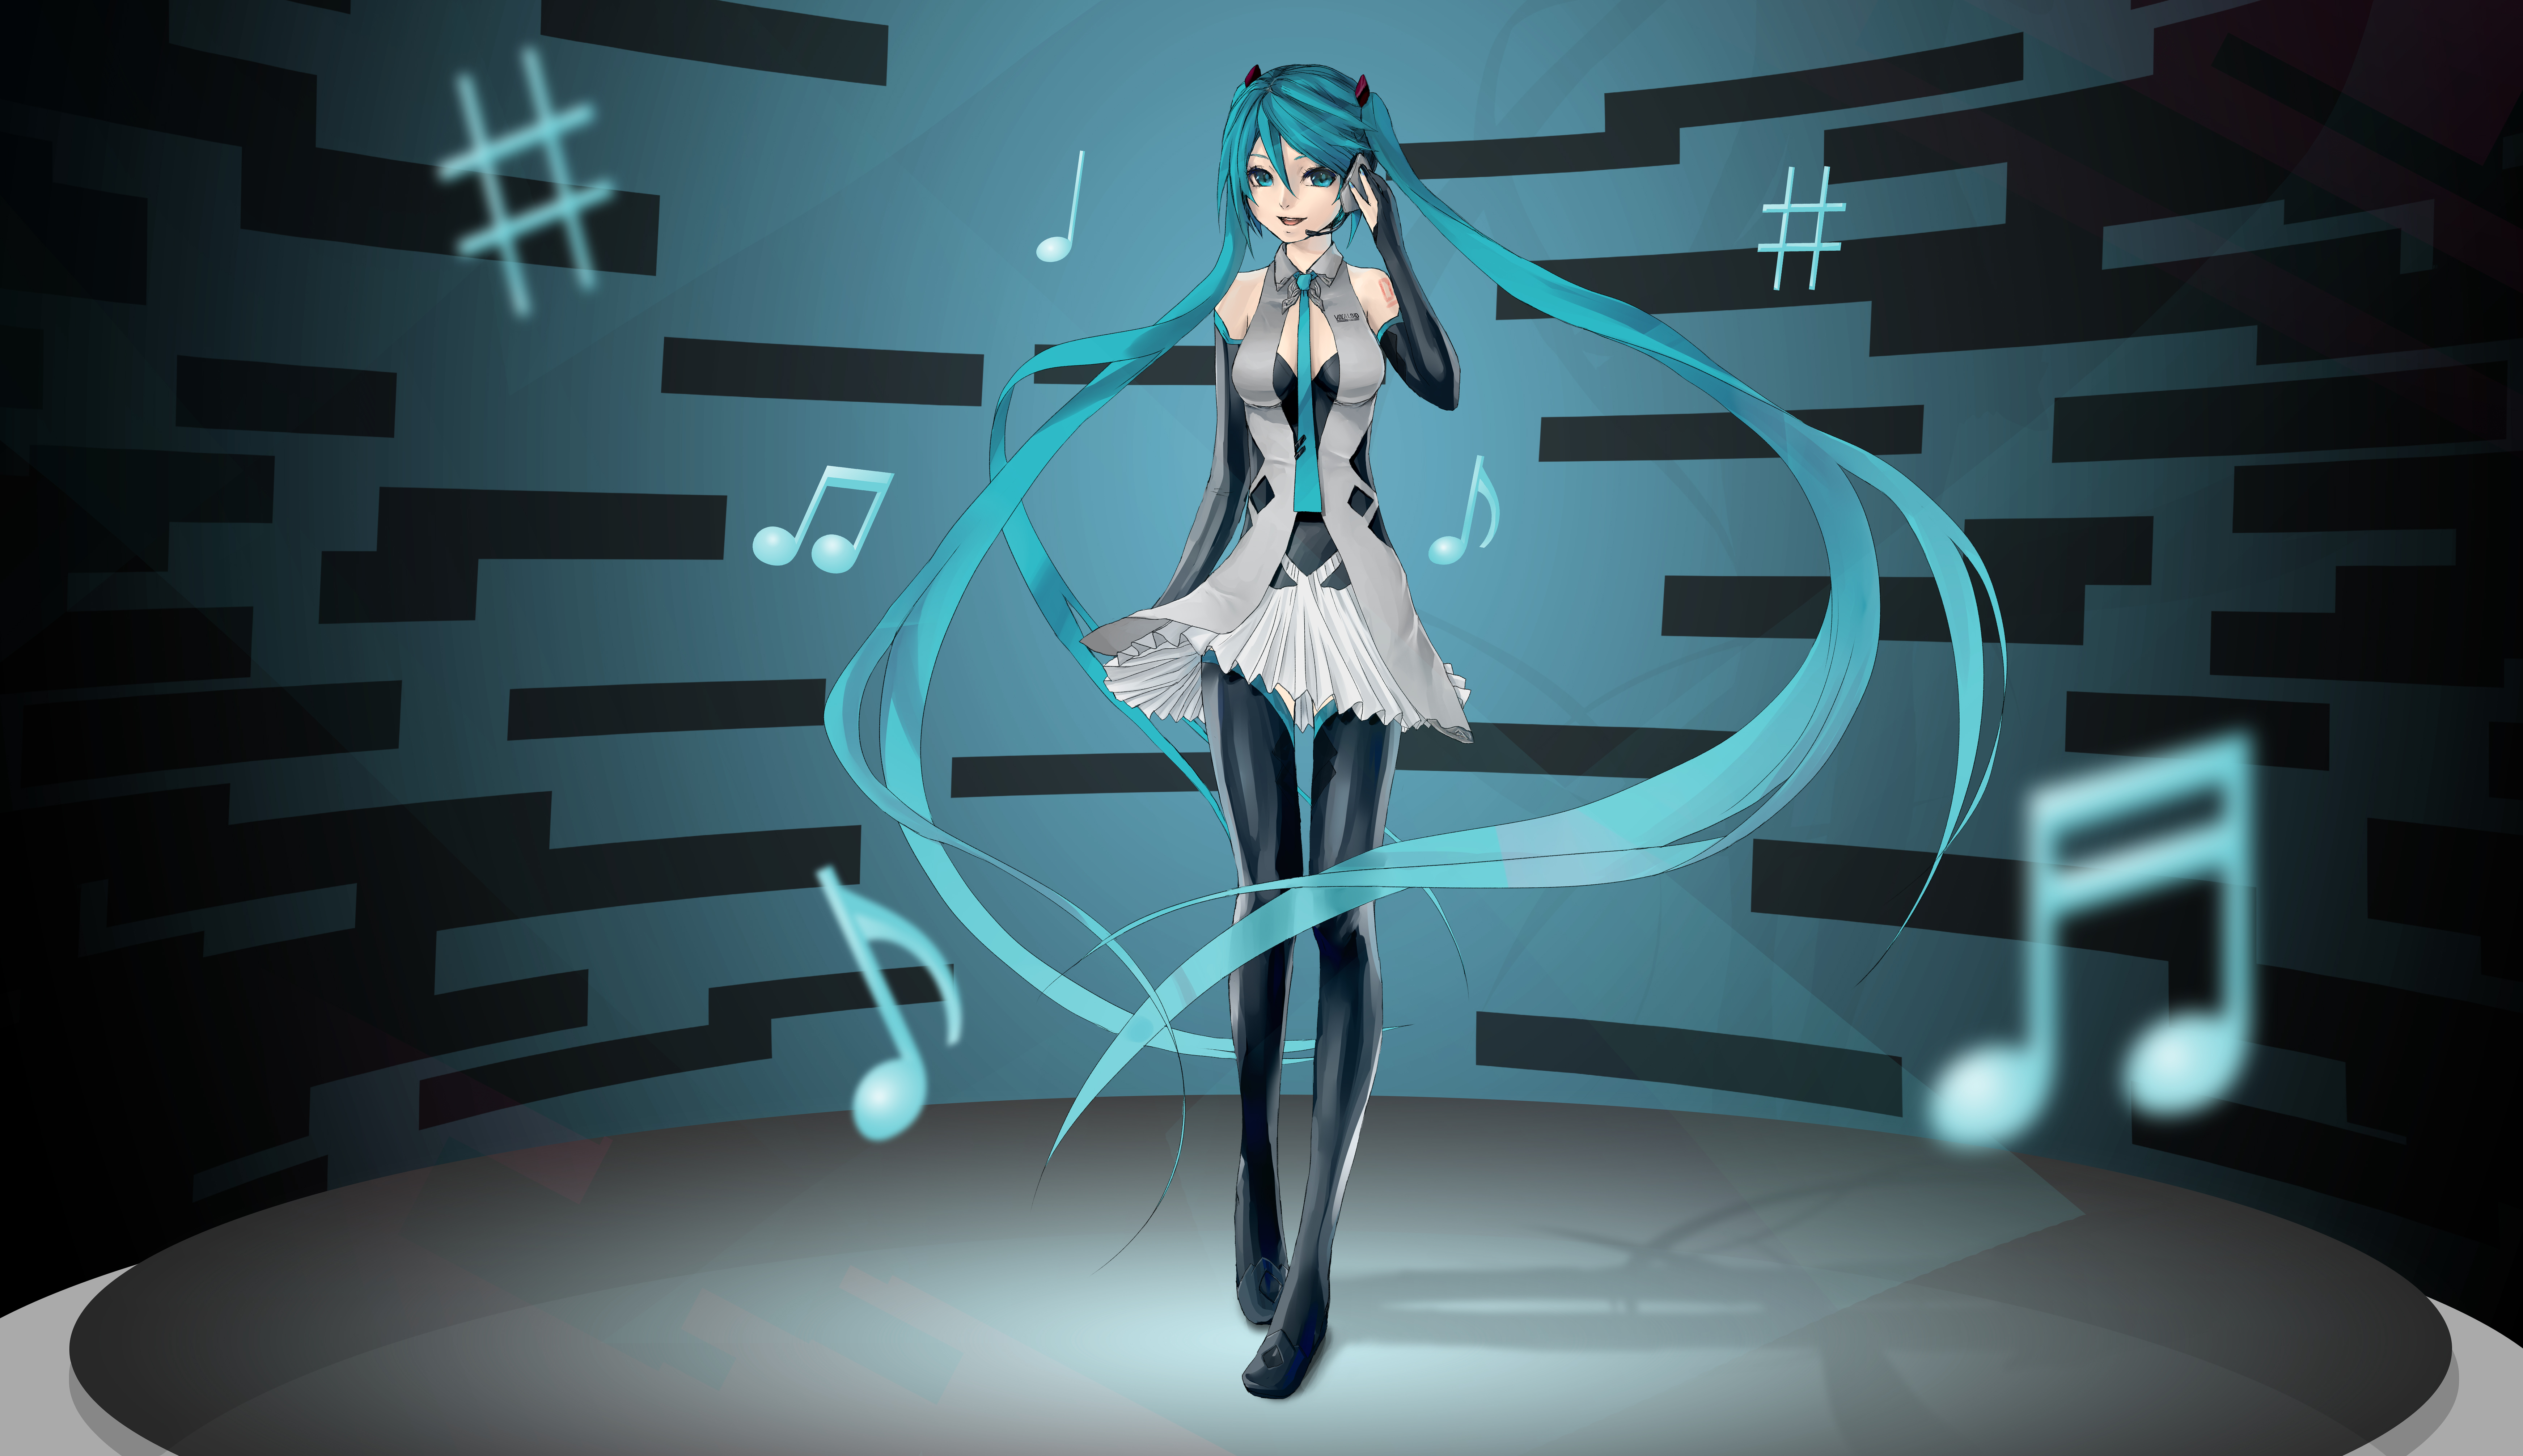 Redesign Miku Hatsune entry by xaetic